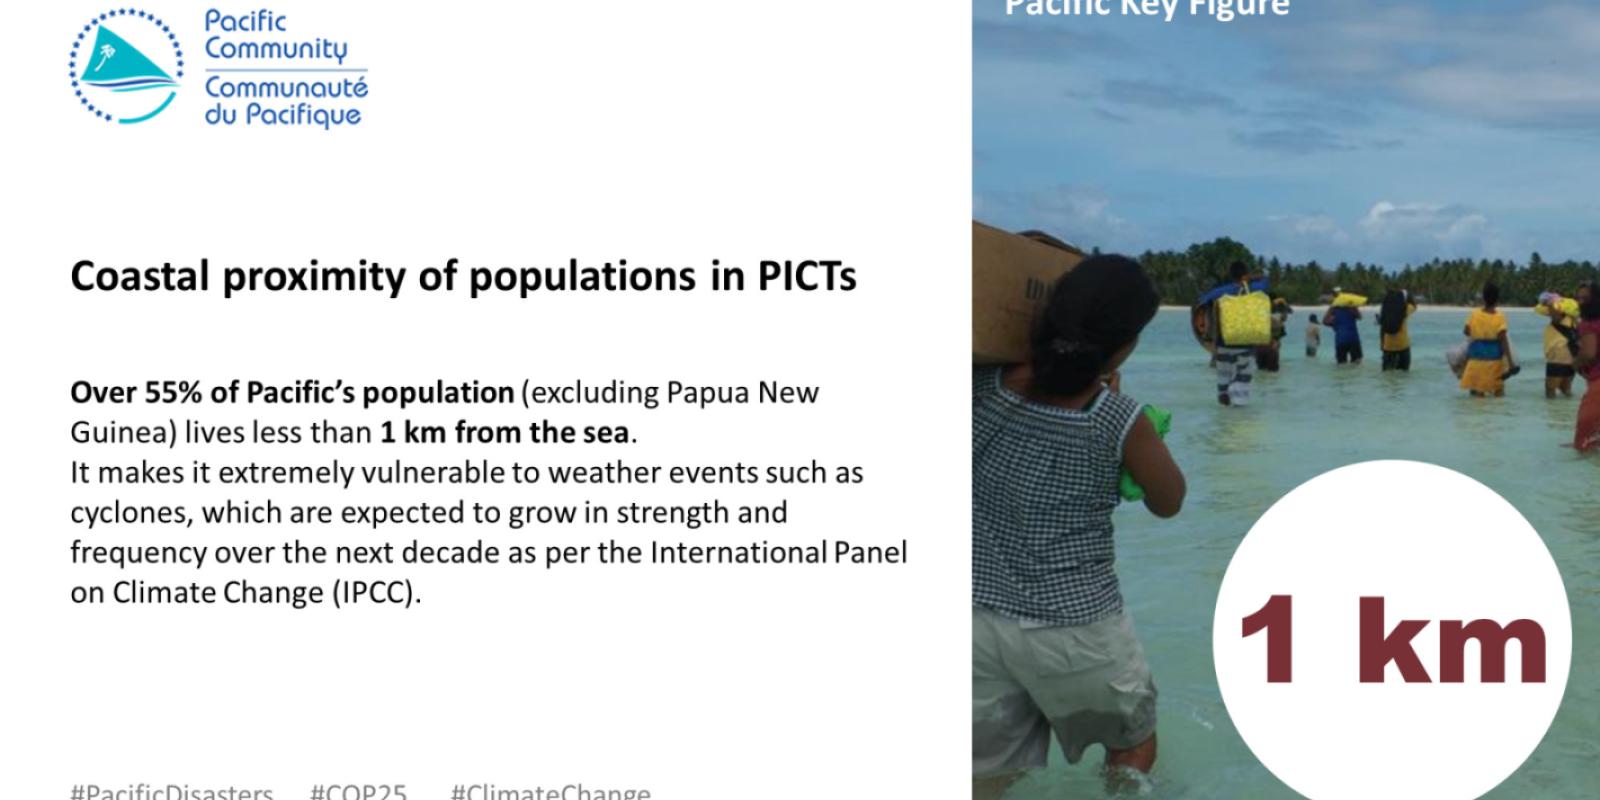 Coastal proximity of populations in PICTs